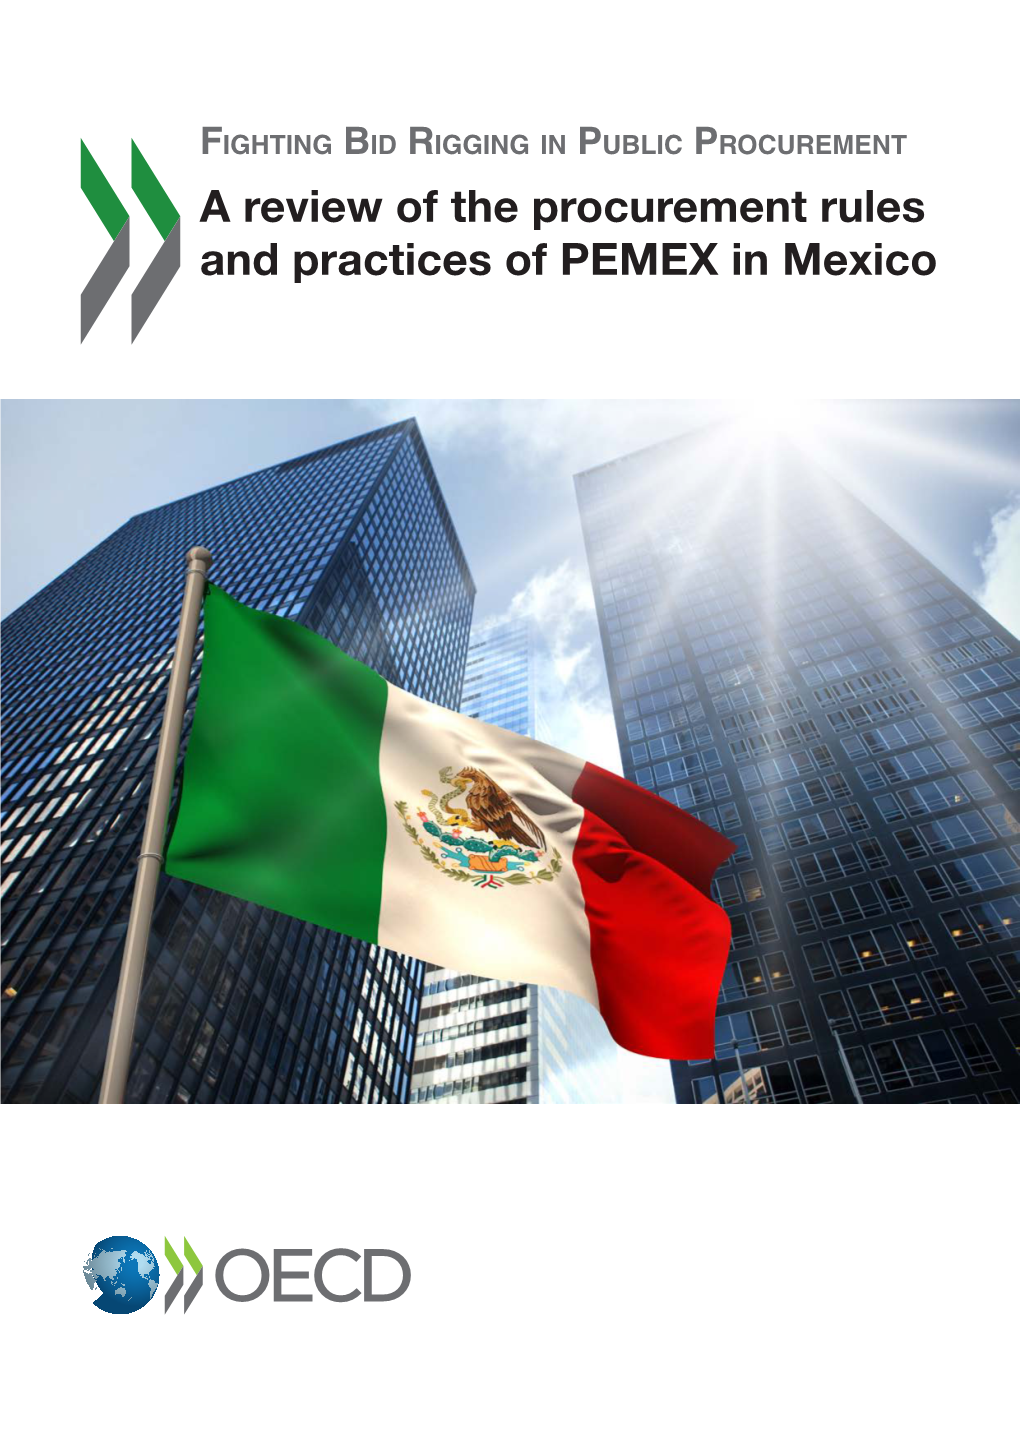 A Review of the Procurement Rules and Practices of PEMEX in Mexico This Work Is Published Under the Responsibility of the Secretary-General of the OECD